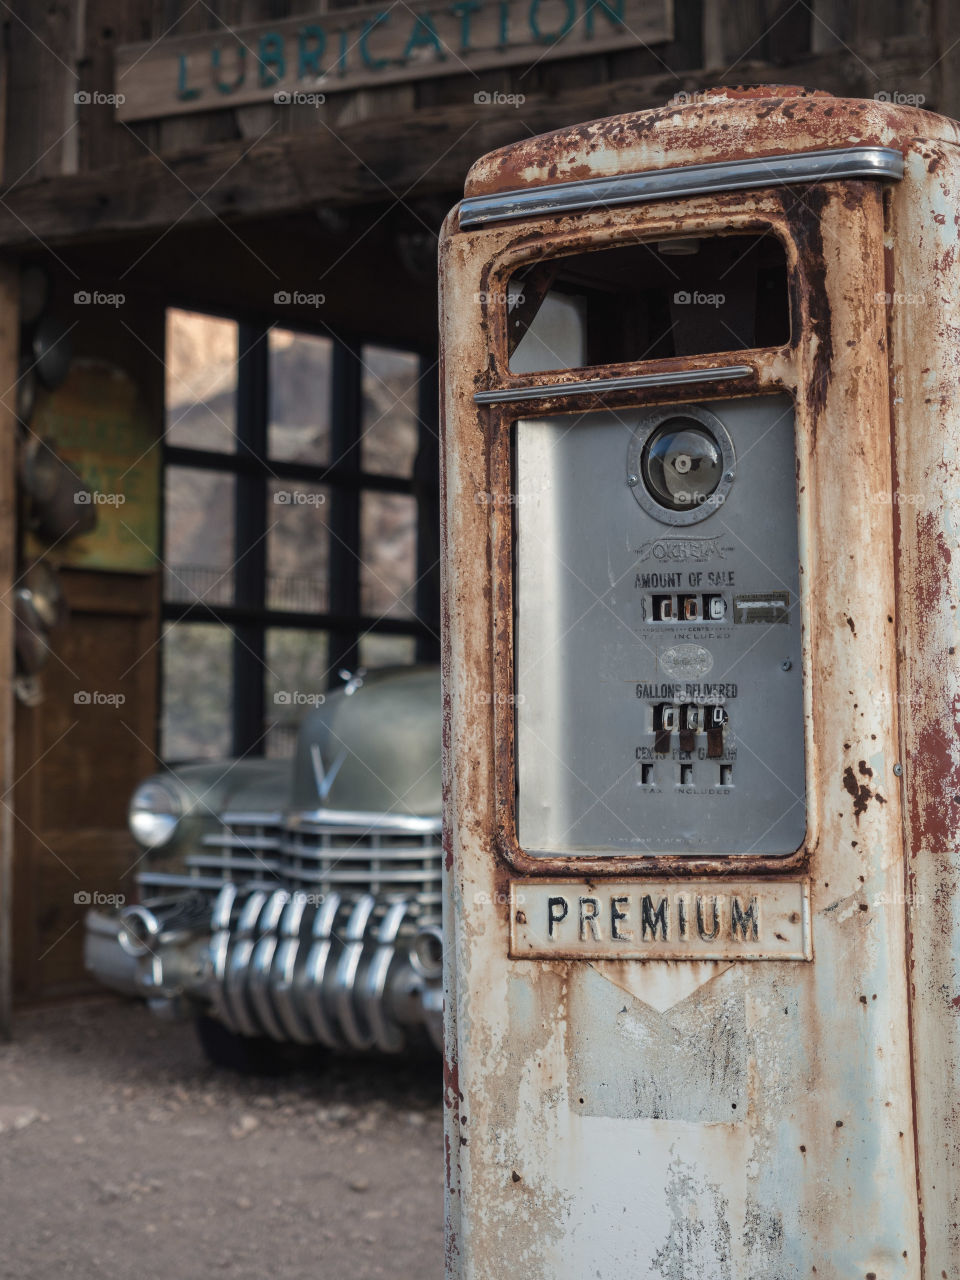 Abandoned America. Out in the Nevada desert lies an old mining town full of history and treasures.